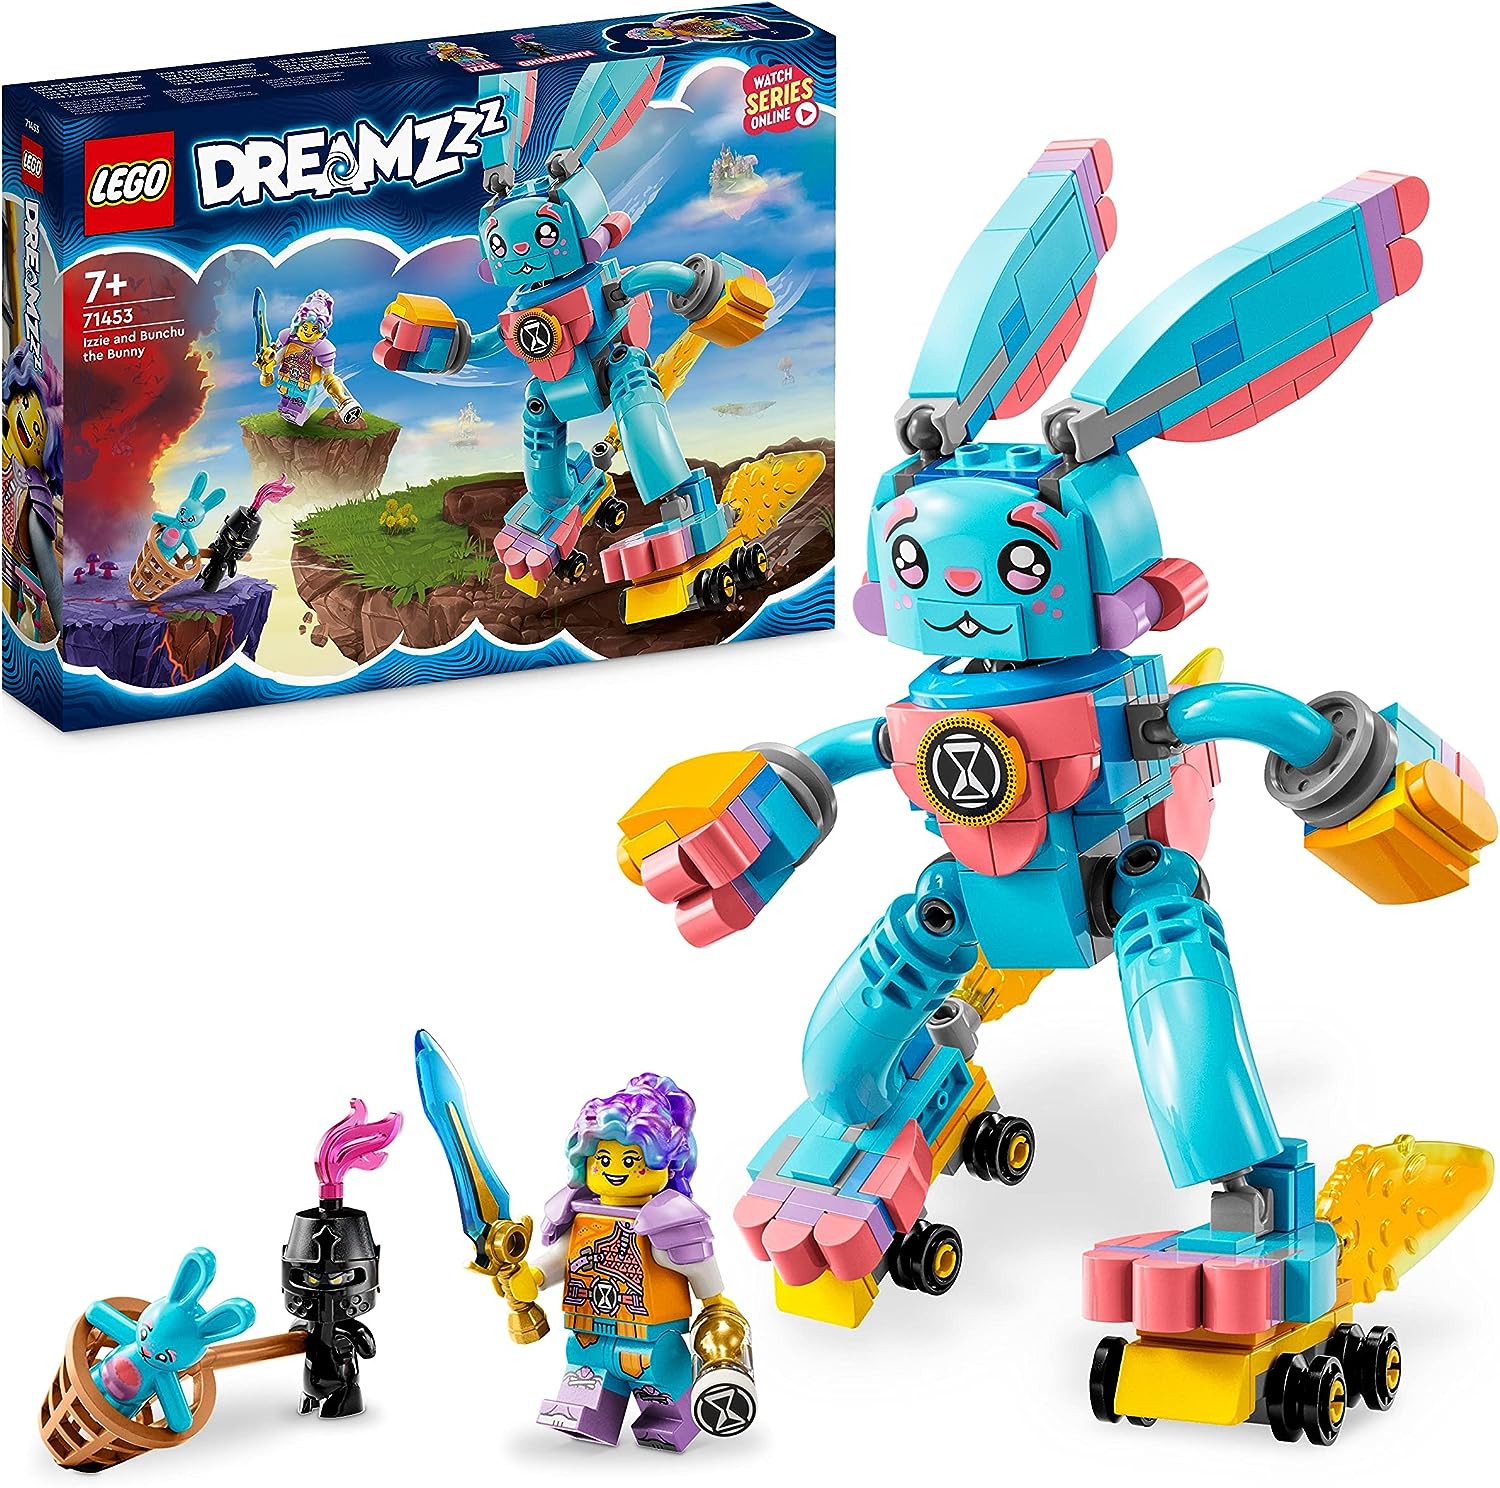 LEGO 71453 DREAMZzz Izzie and Her Rabbit Bunchu Set, Buildable Rabbit Toy with Roller Skates, 2 Types for Imaginative Play, Based on the TV Series, for Children, Girls, Boys from 7 Years